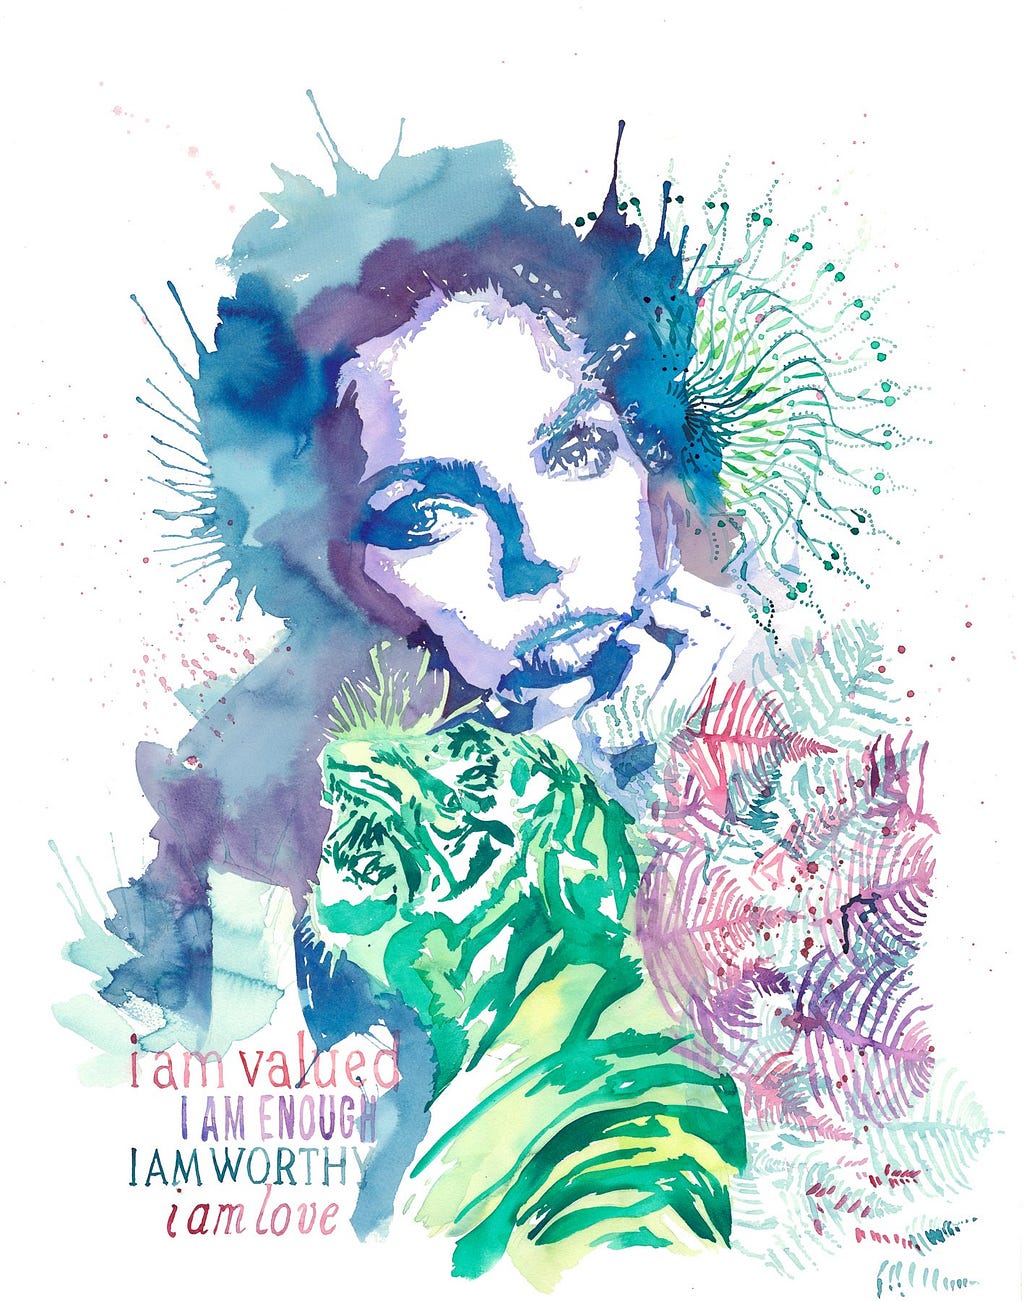 A bold watercolor painting of a woman, mandala, tiger, and plants with affirmations that state “I Am Valued”, “I Am Enough”, “I Am Worthy”, and “I Am Love”.